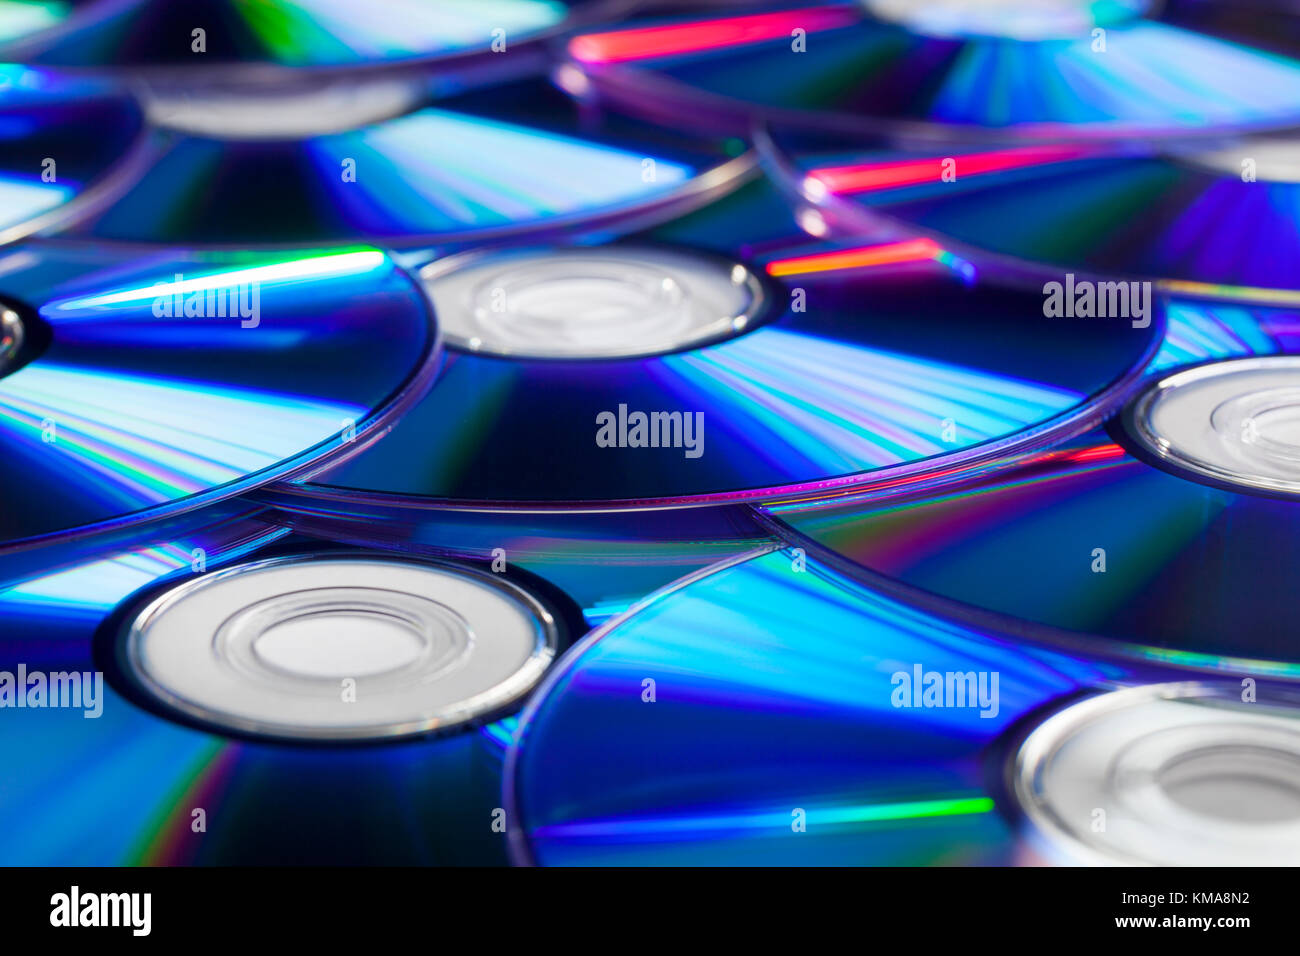 Pile of CD Compact Discs and DVDs with nice reflections Stock Photo